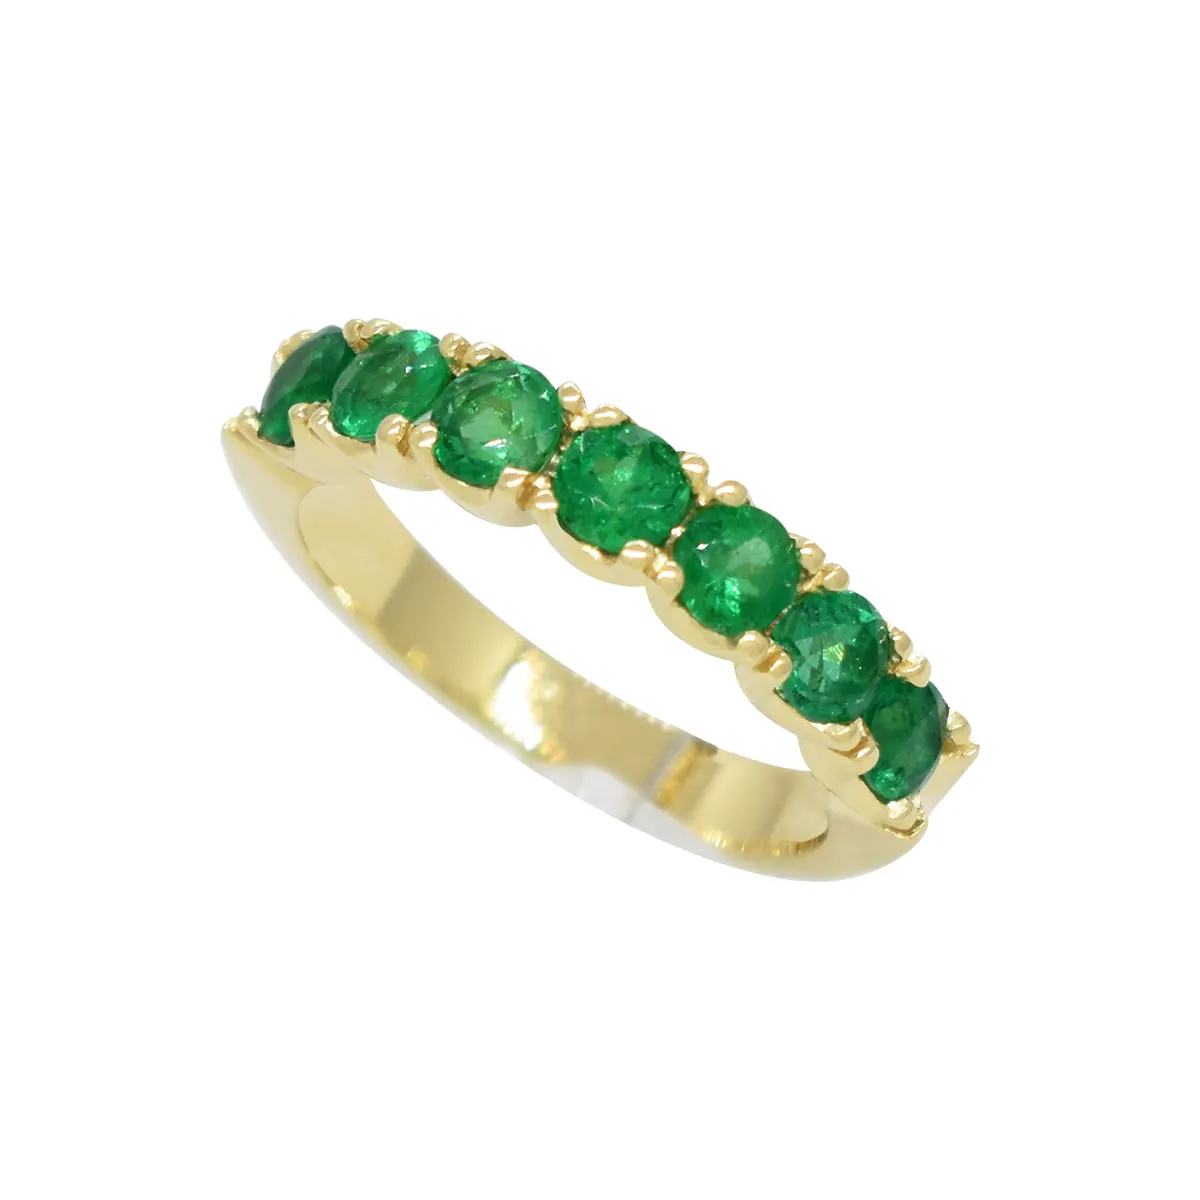 The almost 1-carat combined weight of the 7 emeralds makes the size of the gems perfect for a substantial emerald ring